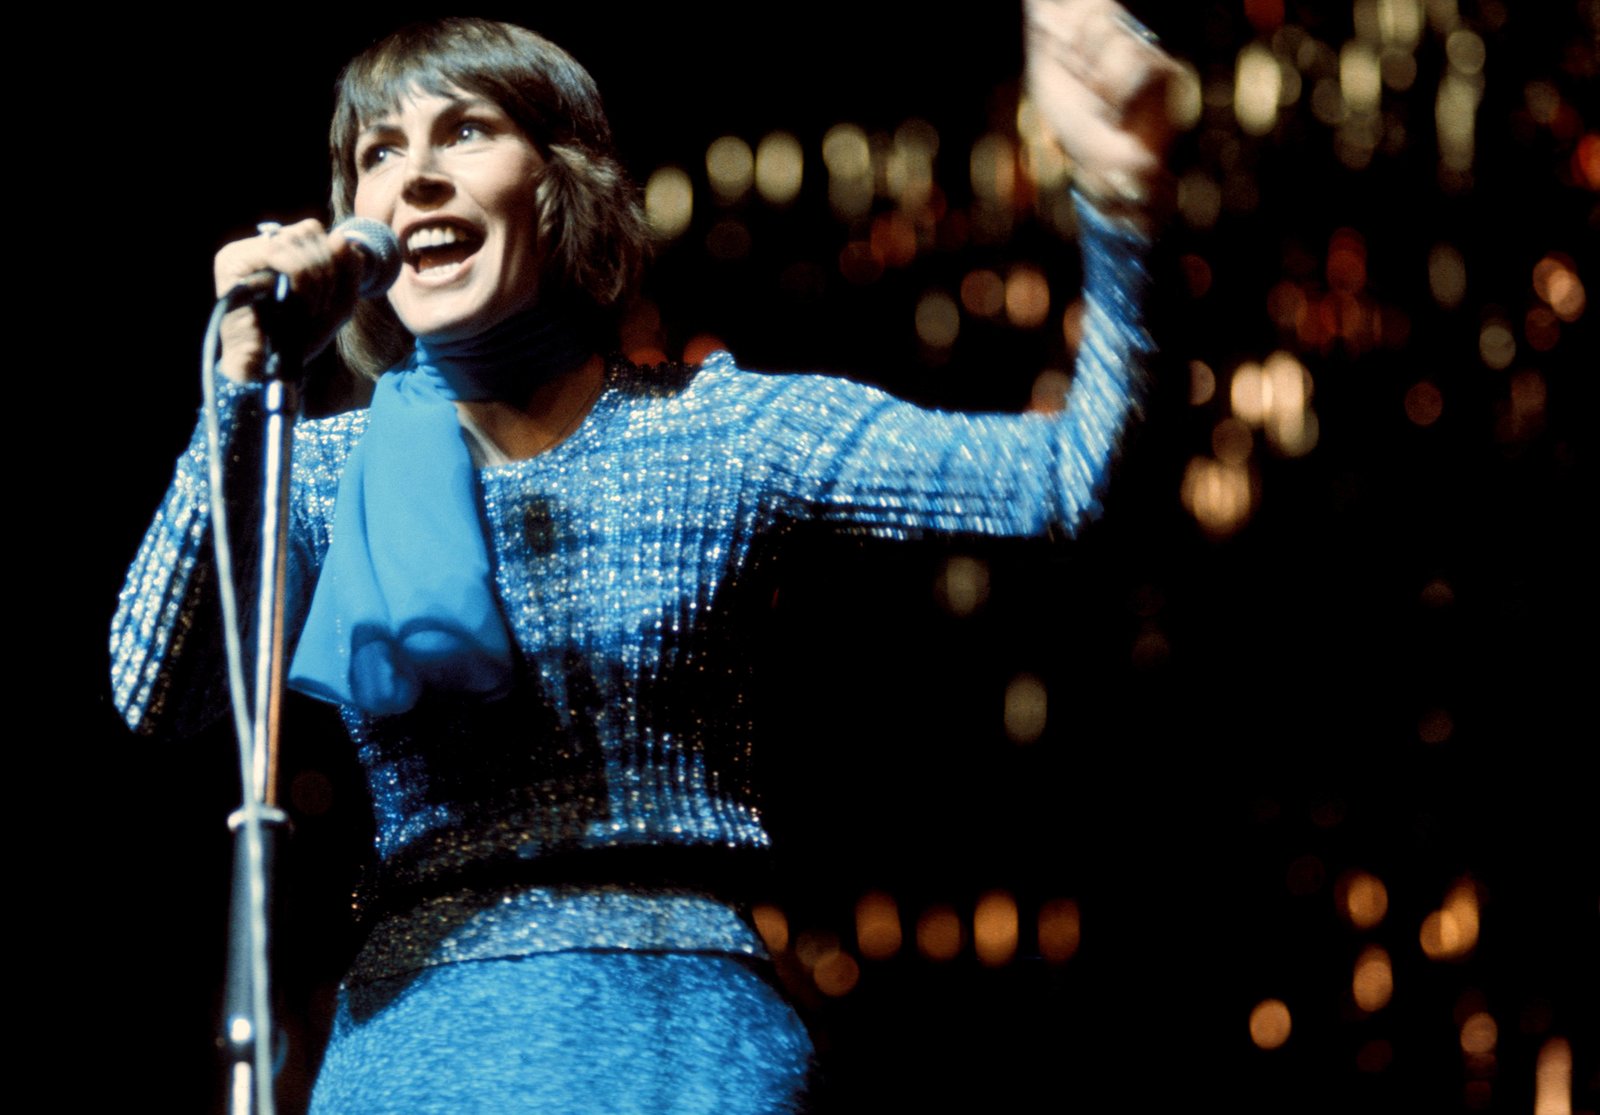 "I Am Woman" singer Helen Reddy performs in 1970. CREDIT: IAN DICKSON